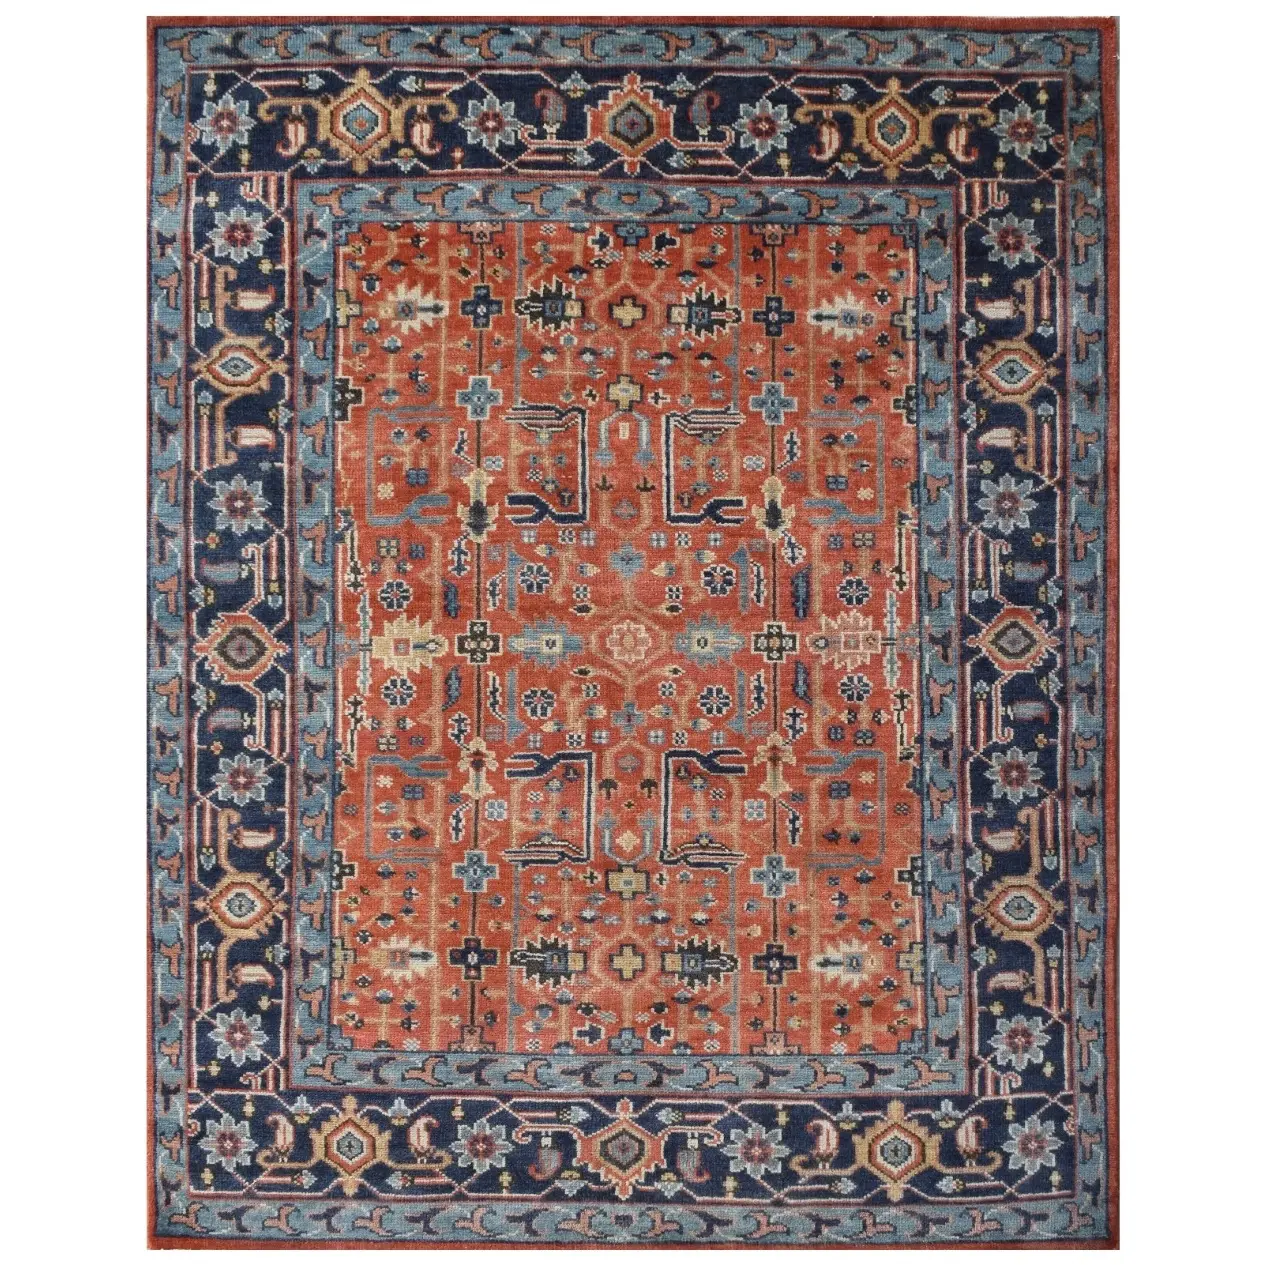 High Quality Hand Knotted Rugs made of Pure Wool Handspun Wool Premium Hand Knotted Wool Carpets Ushak Design